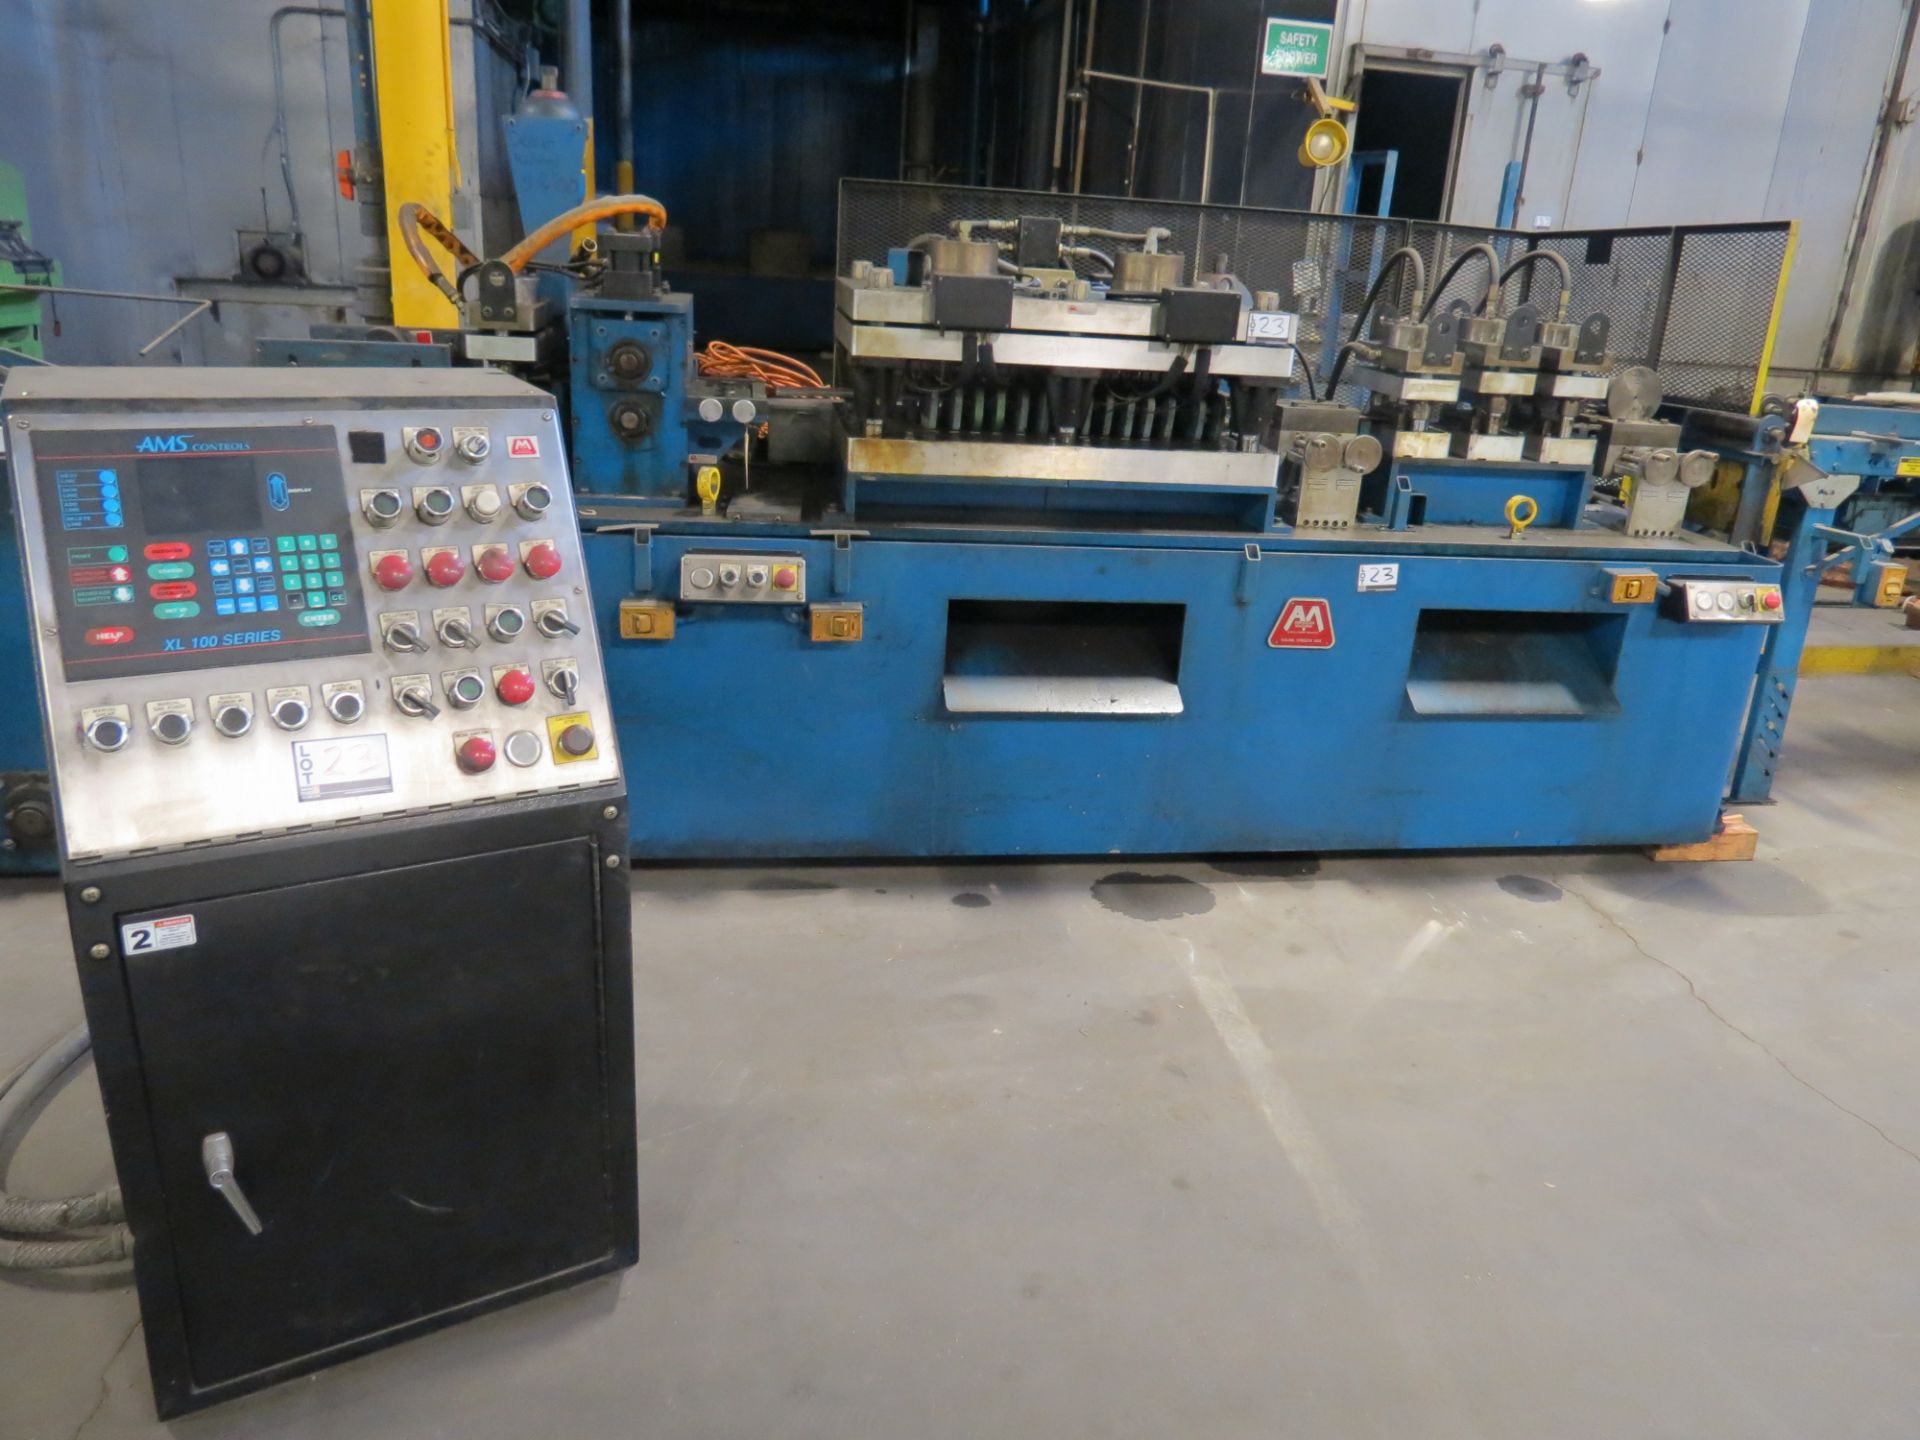 AMS Material Straightener with hyd shear & punches, XL 100 Controls - Image 7 of 7